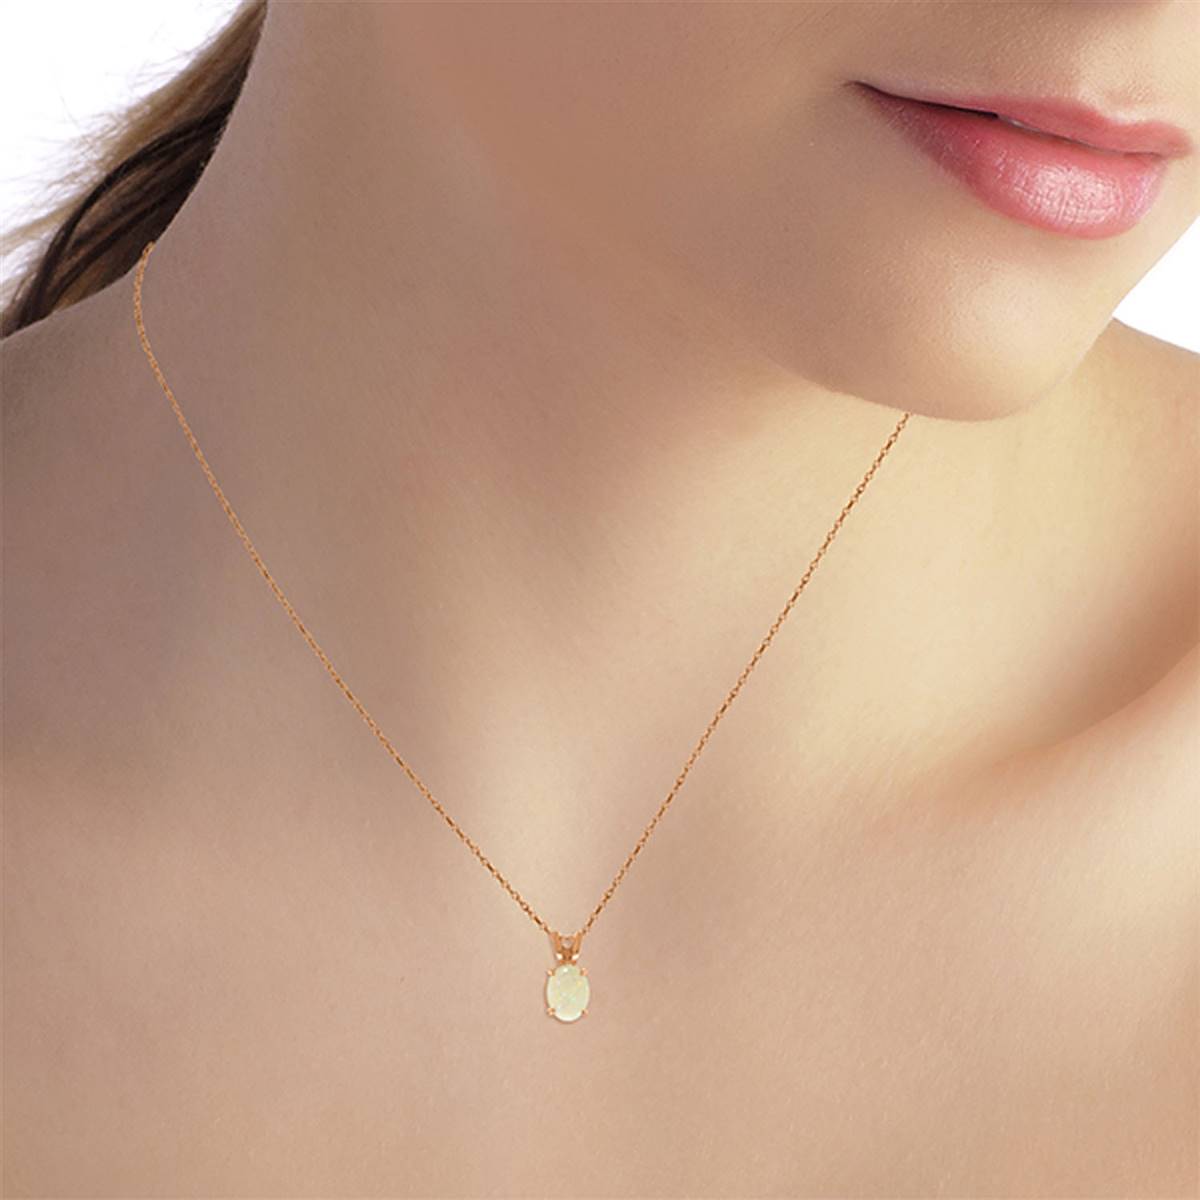 0.45 Carat 14K Solid Rose Gold Solitaire Opal Necklace